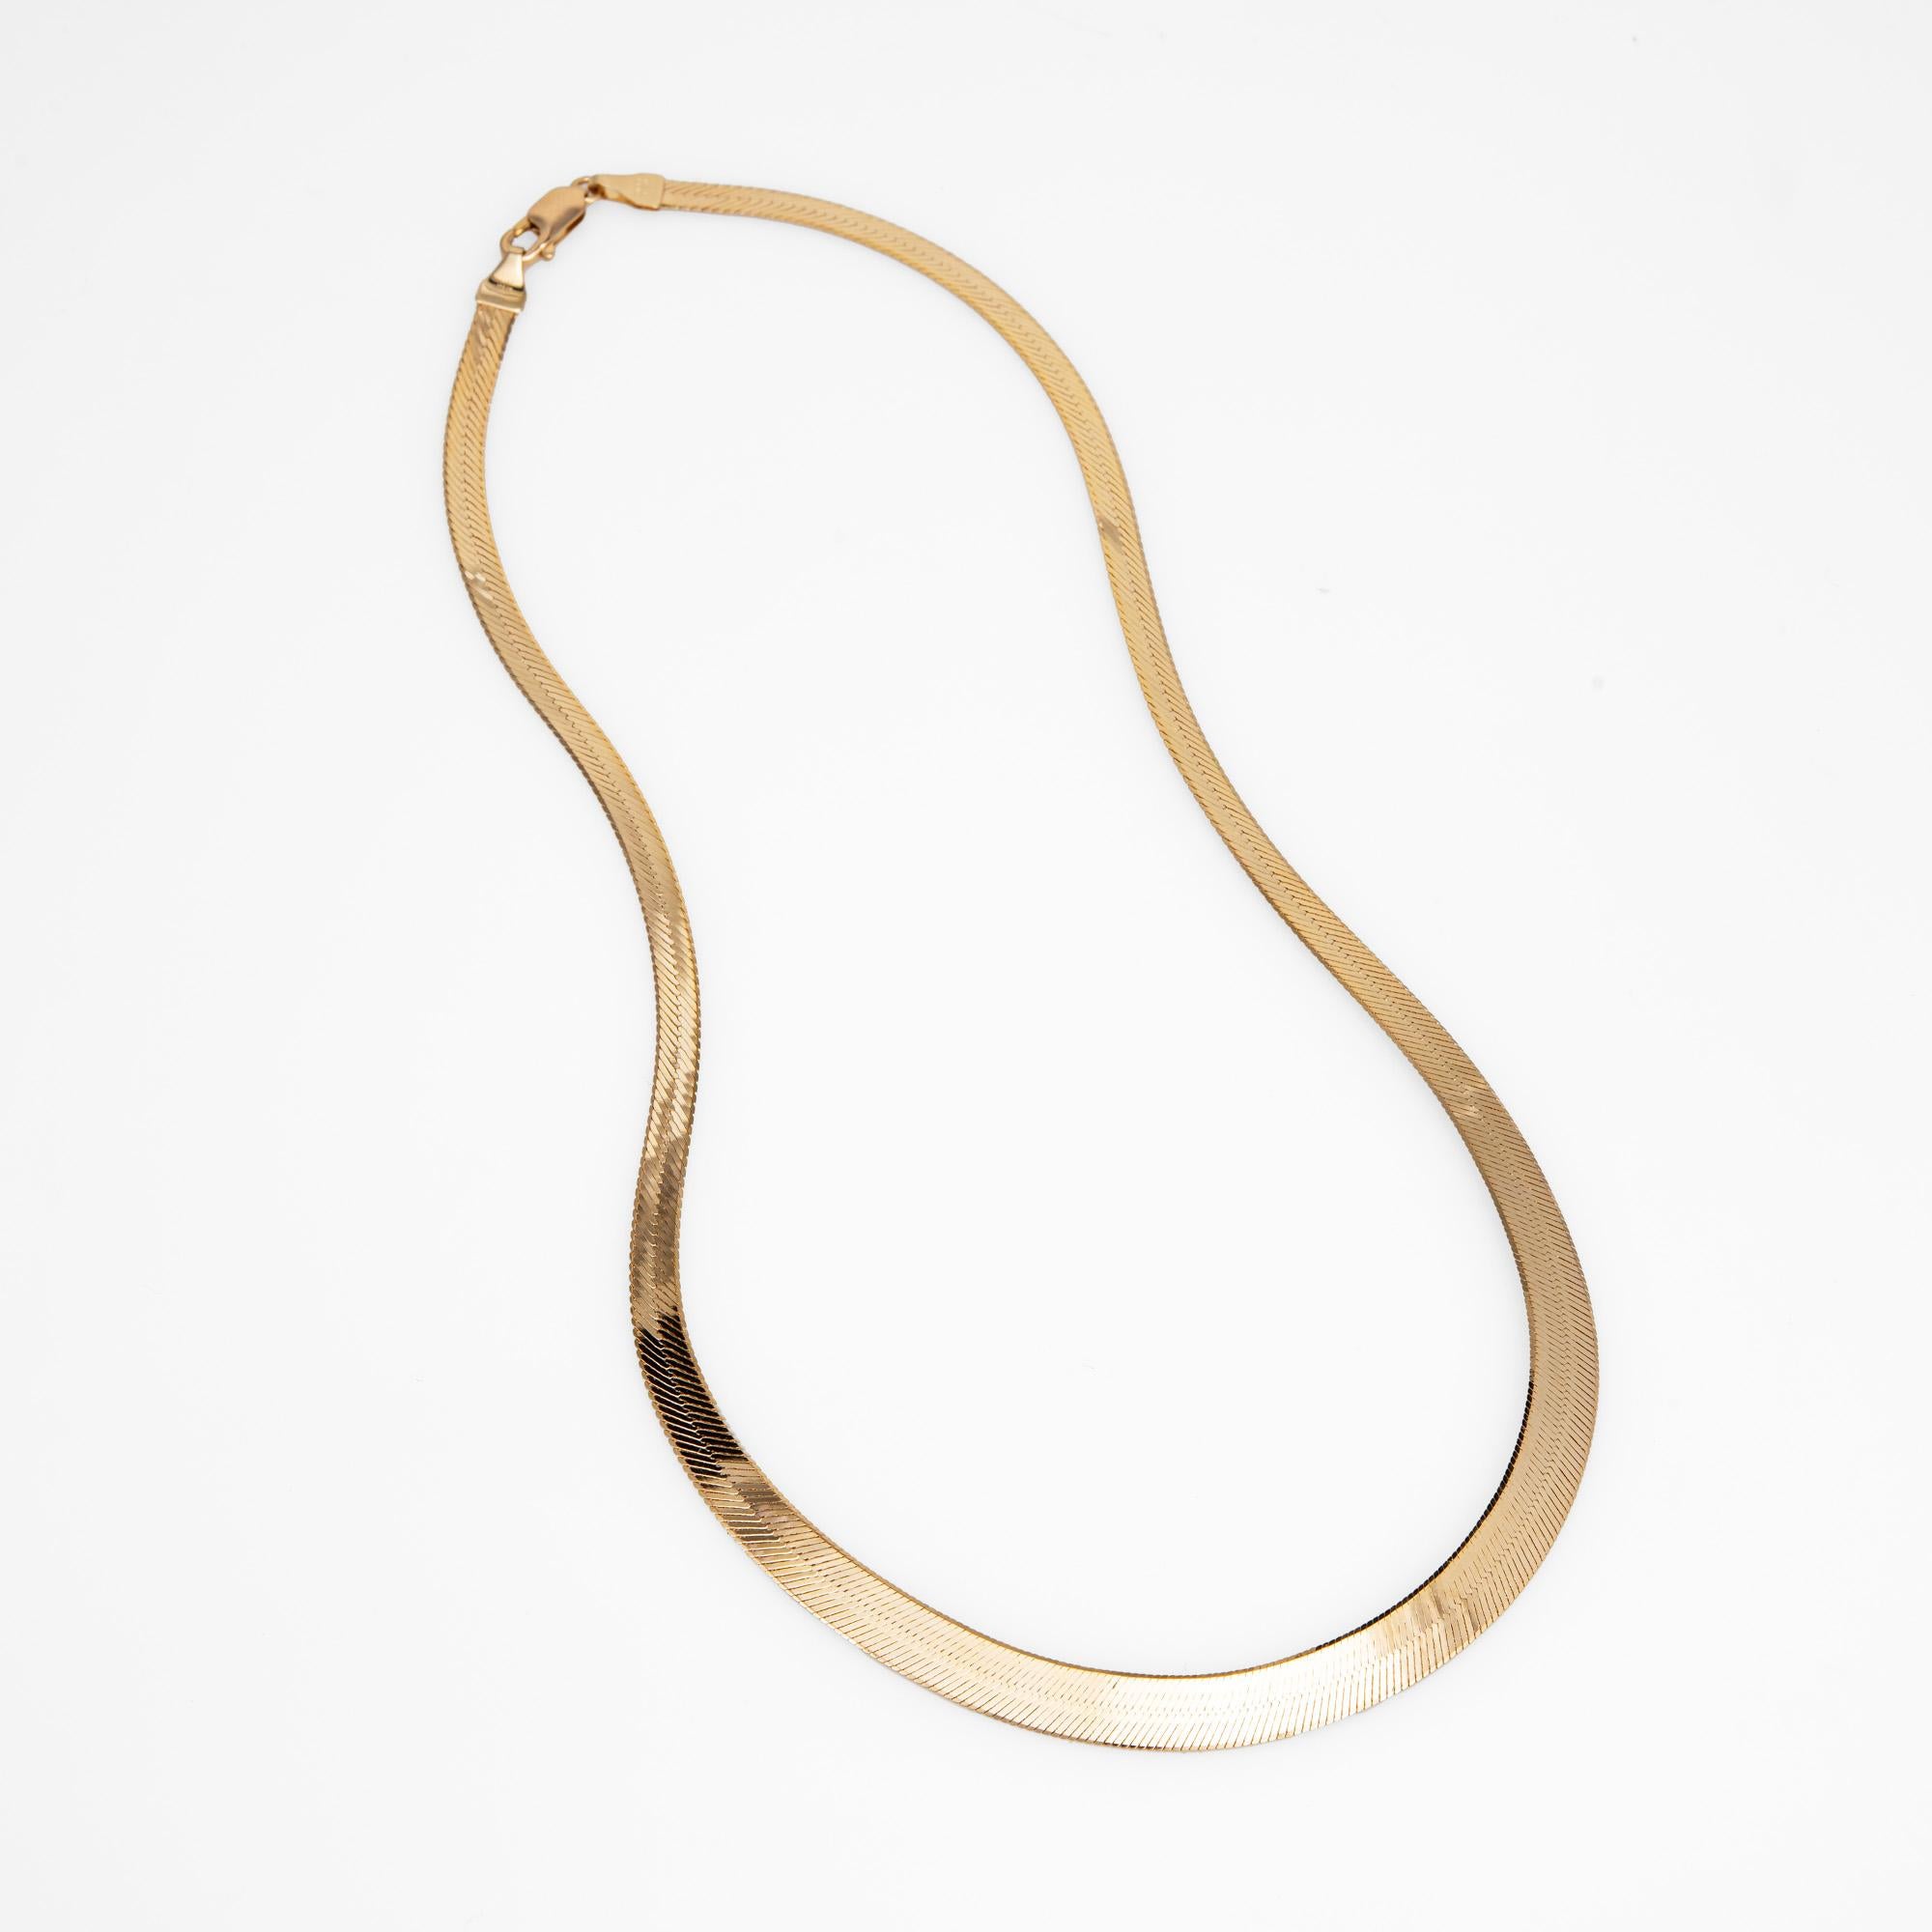 Elegant and finely detailed 14 karat yellow gold herringbone necklace (circa 1980s).  

The necklace measures 17 inches in length and sits nicely just below the nape of the neck. The necklace graduates in width from 4mm to 7mm. The necklace is great